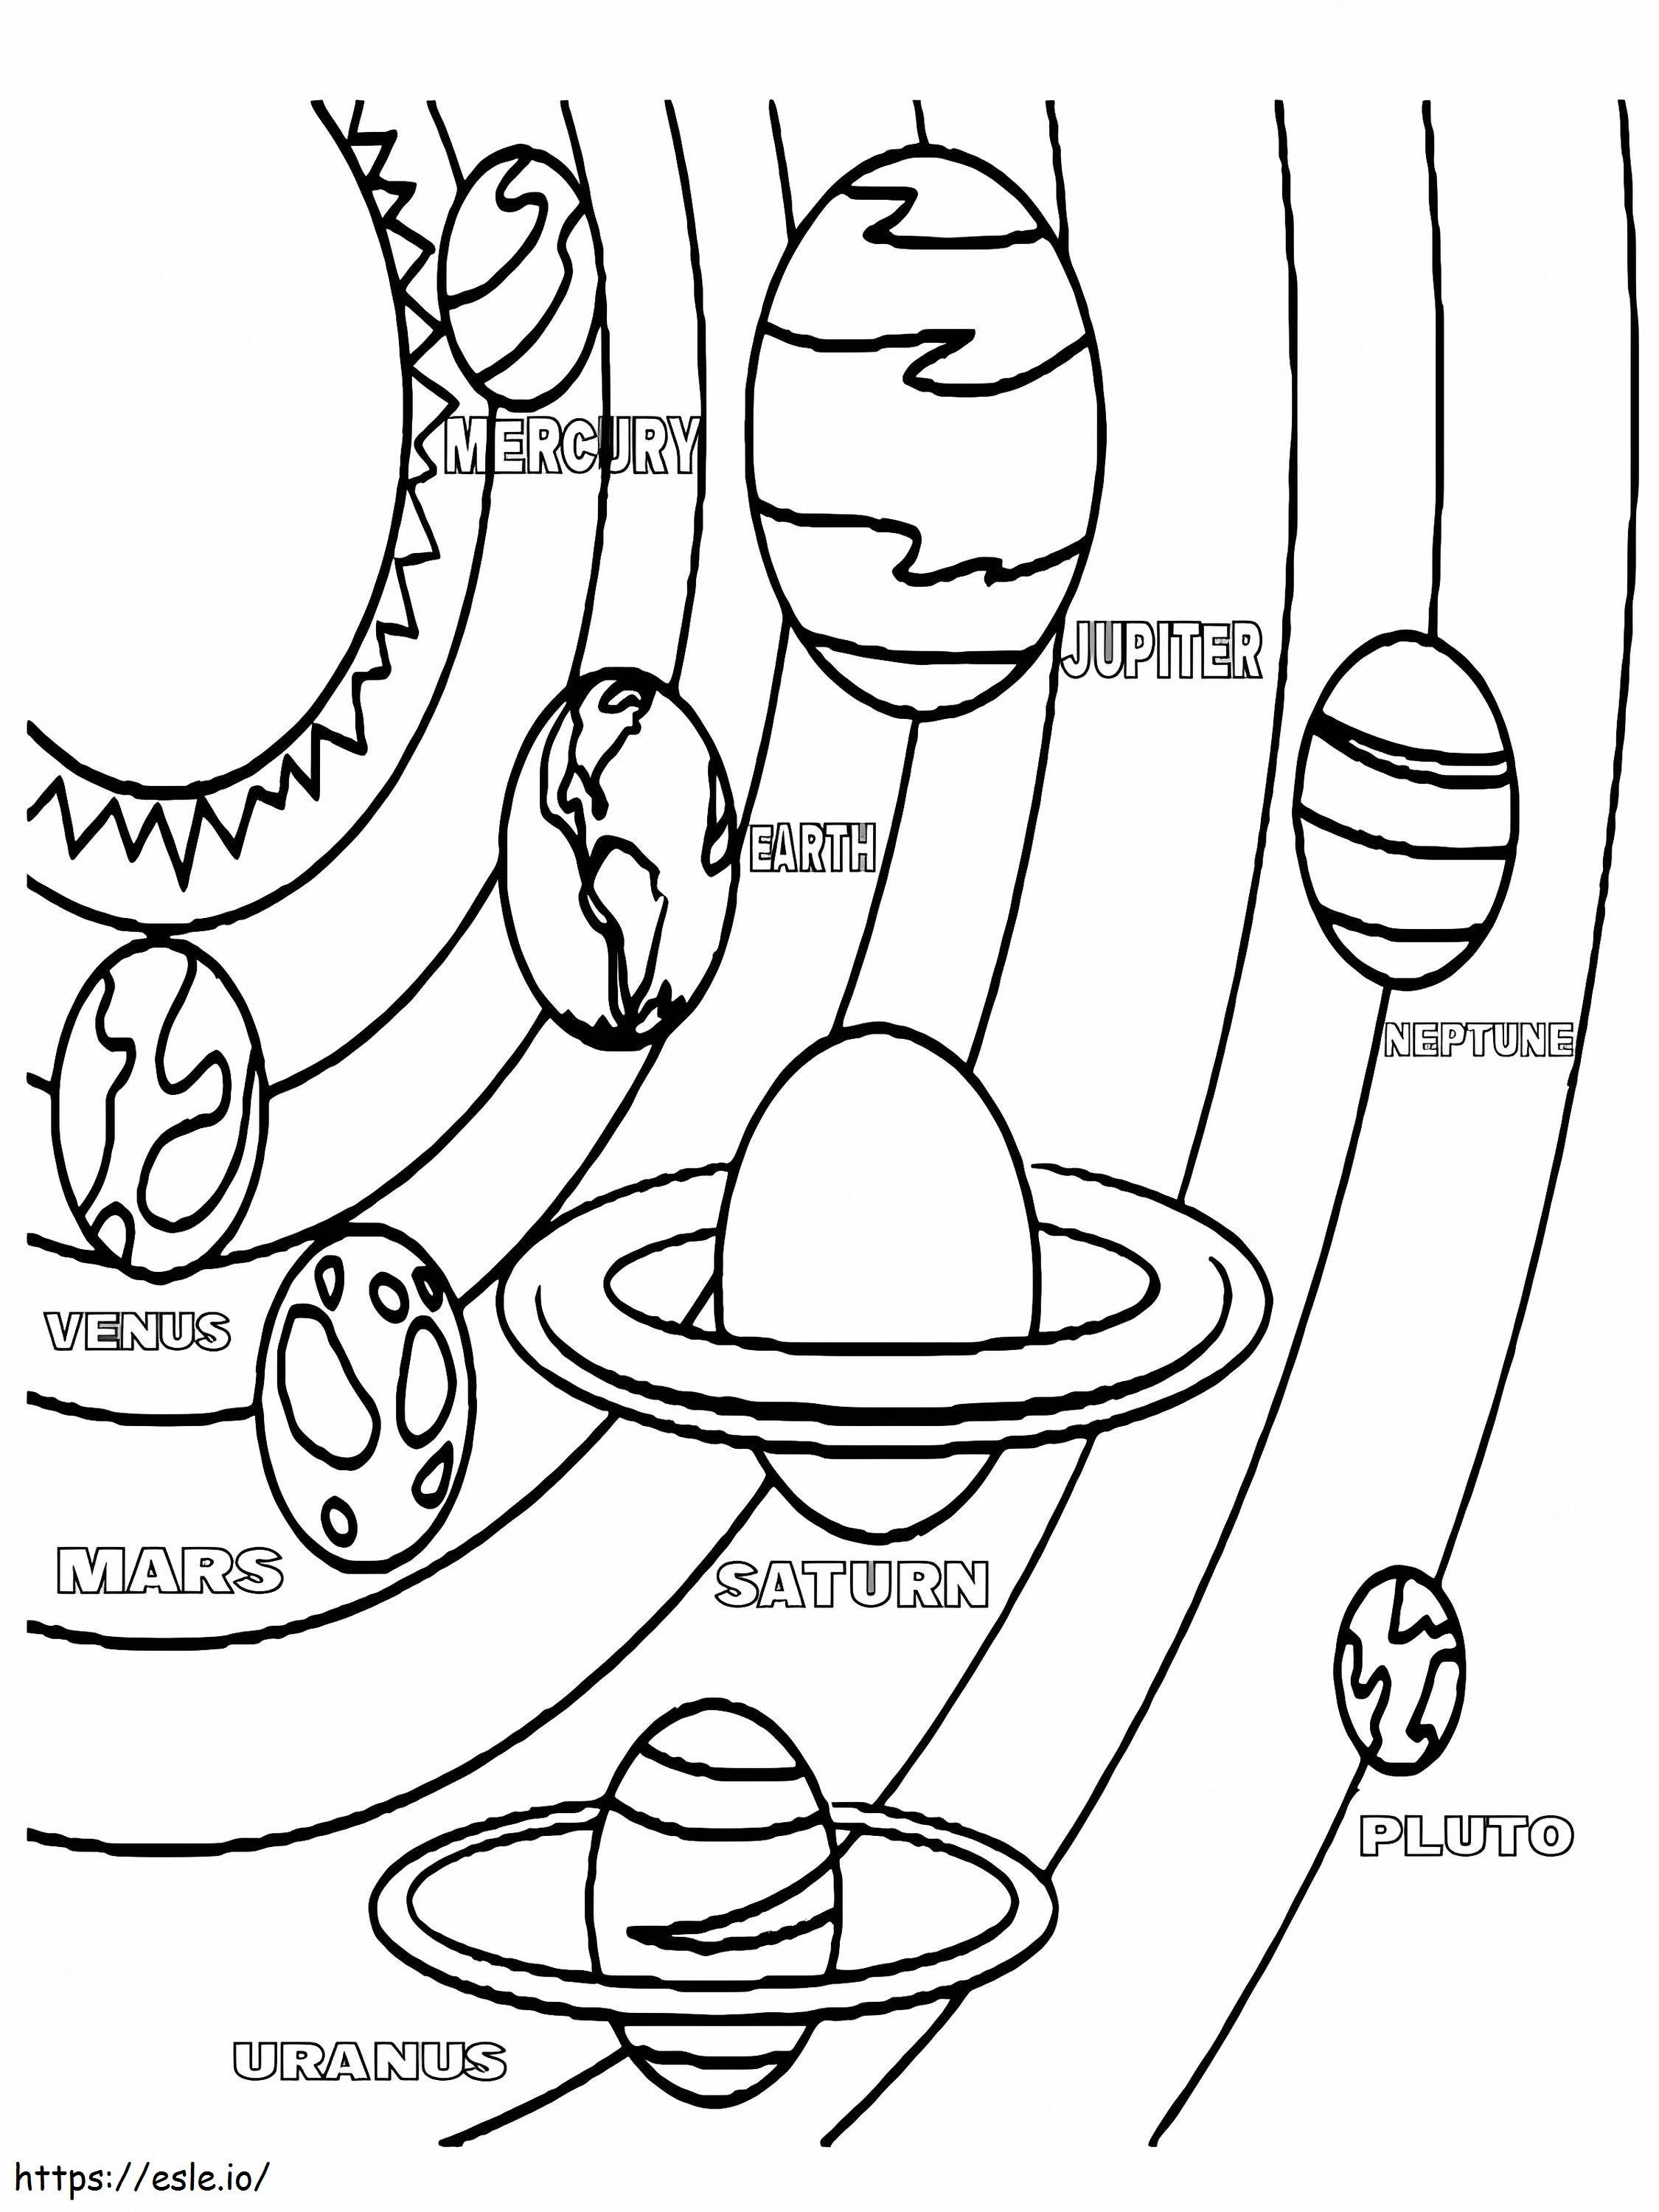 Nine Planets coloring page